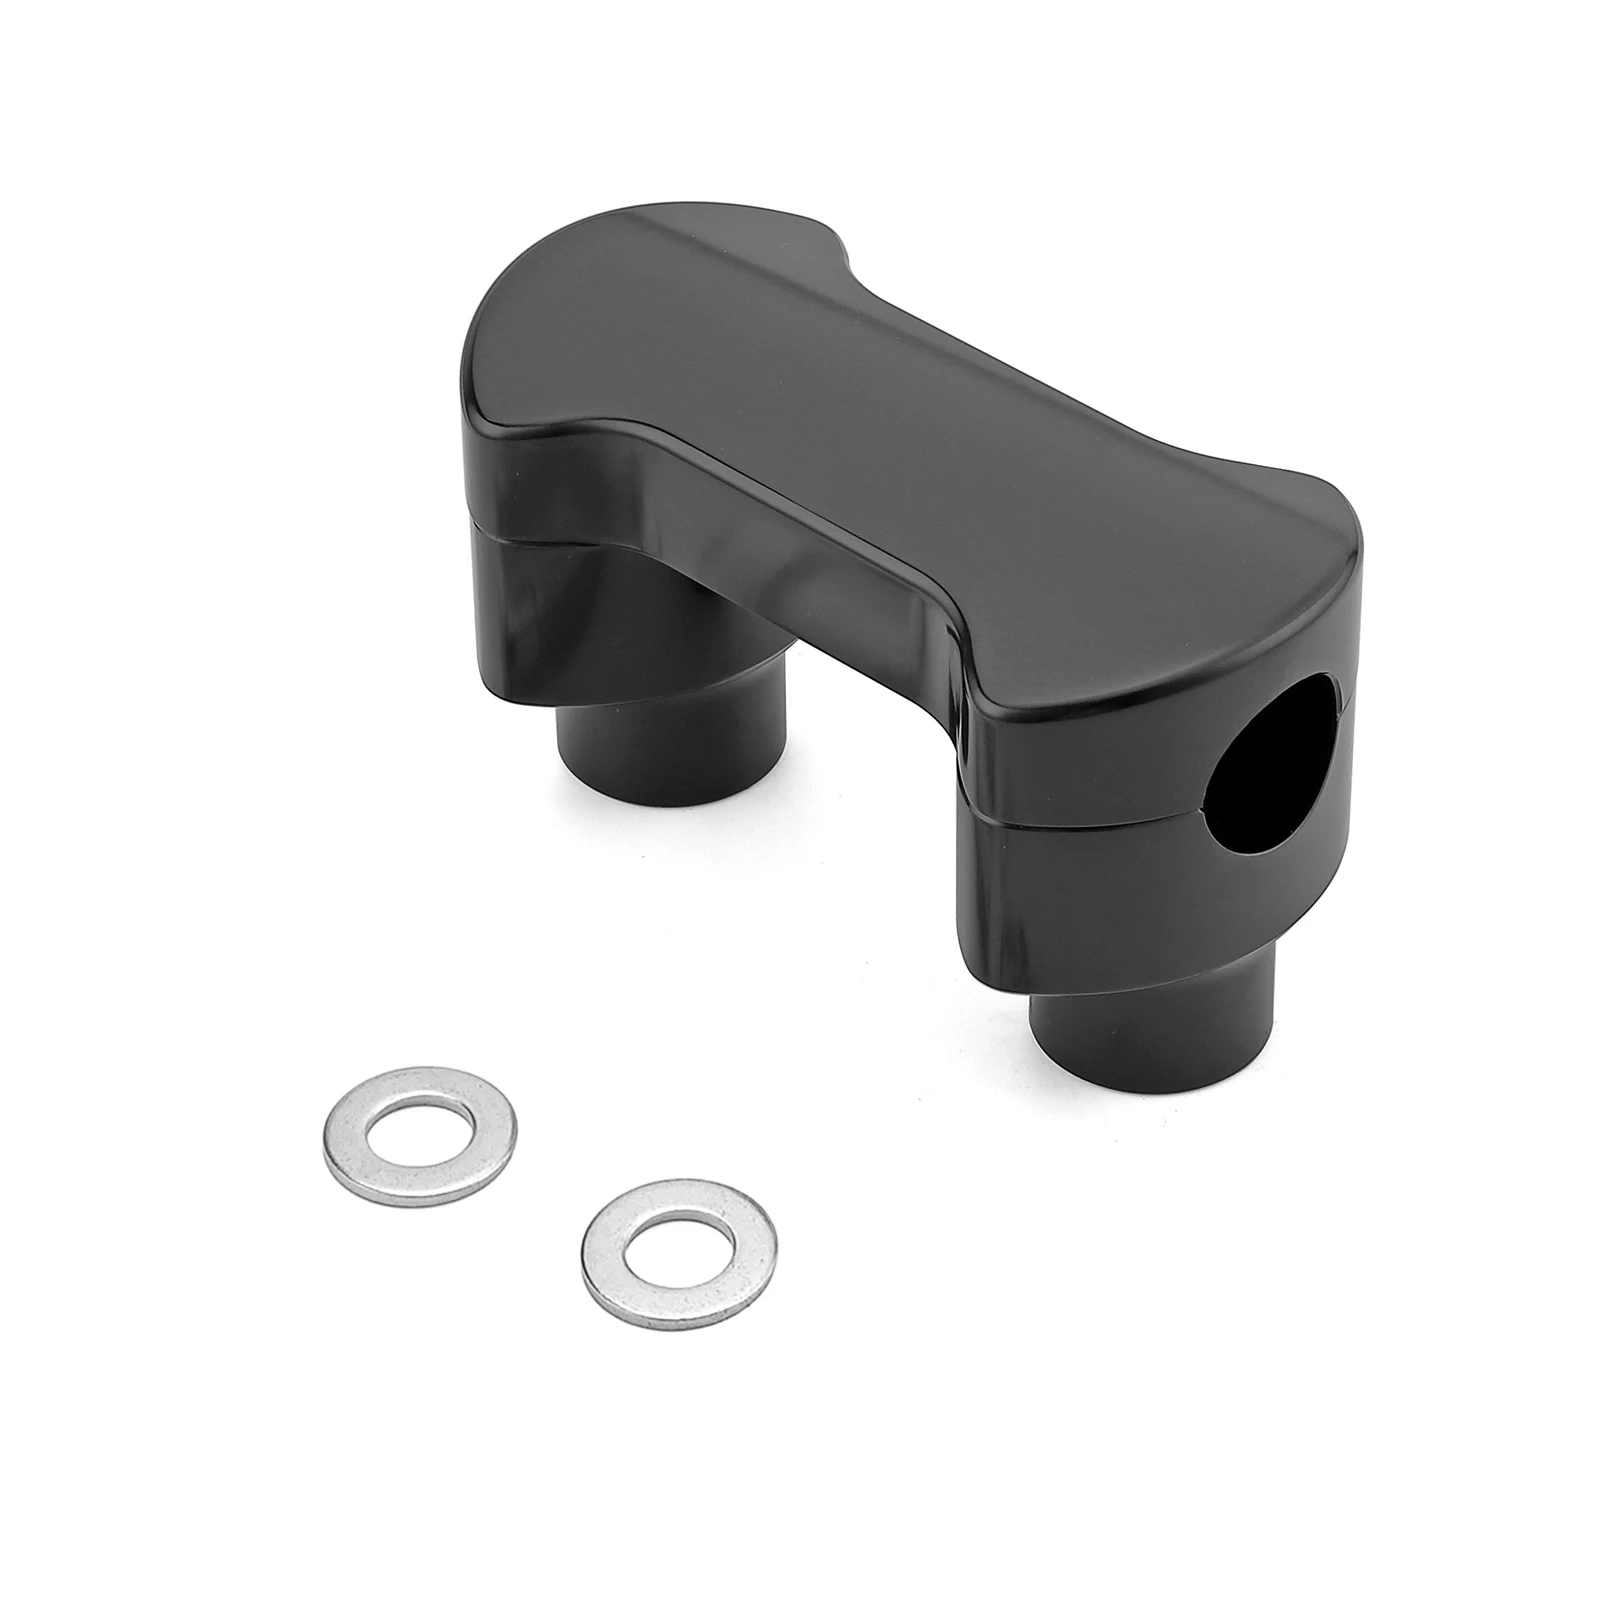 

Motorcycle 2 Inch Riser Kit 1" Handlebar Clamp Gloss Black Top Cover for Harley Dyna/Softail/Sportster 1200&883 Moto Accessories